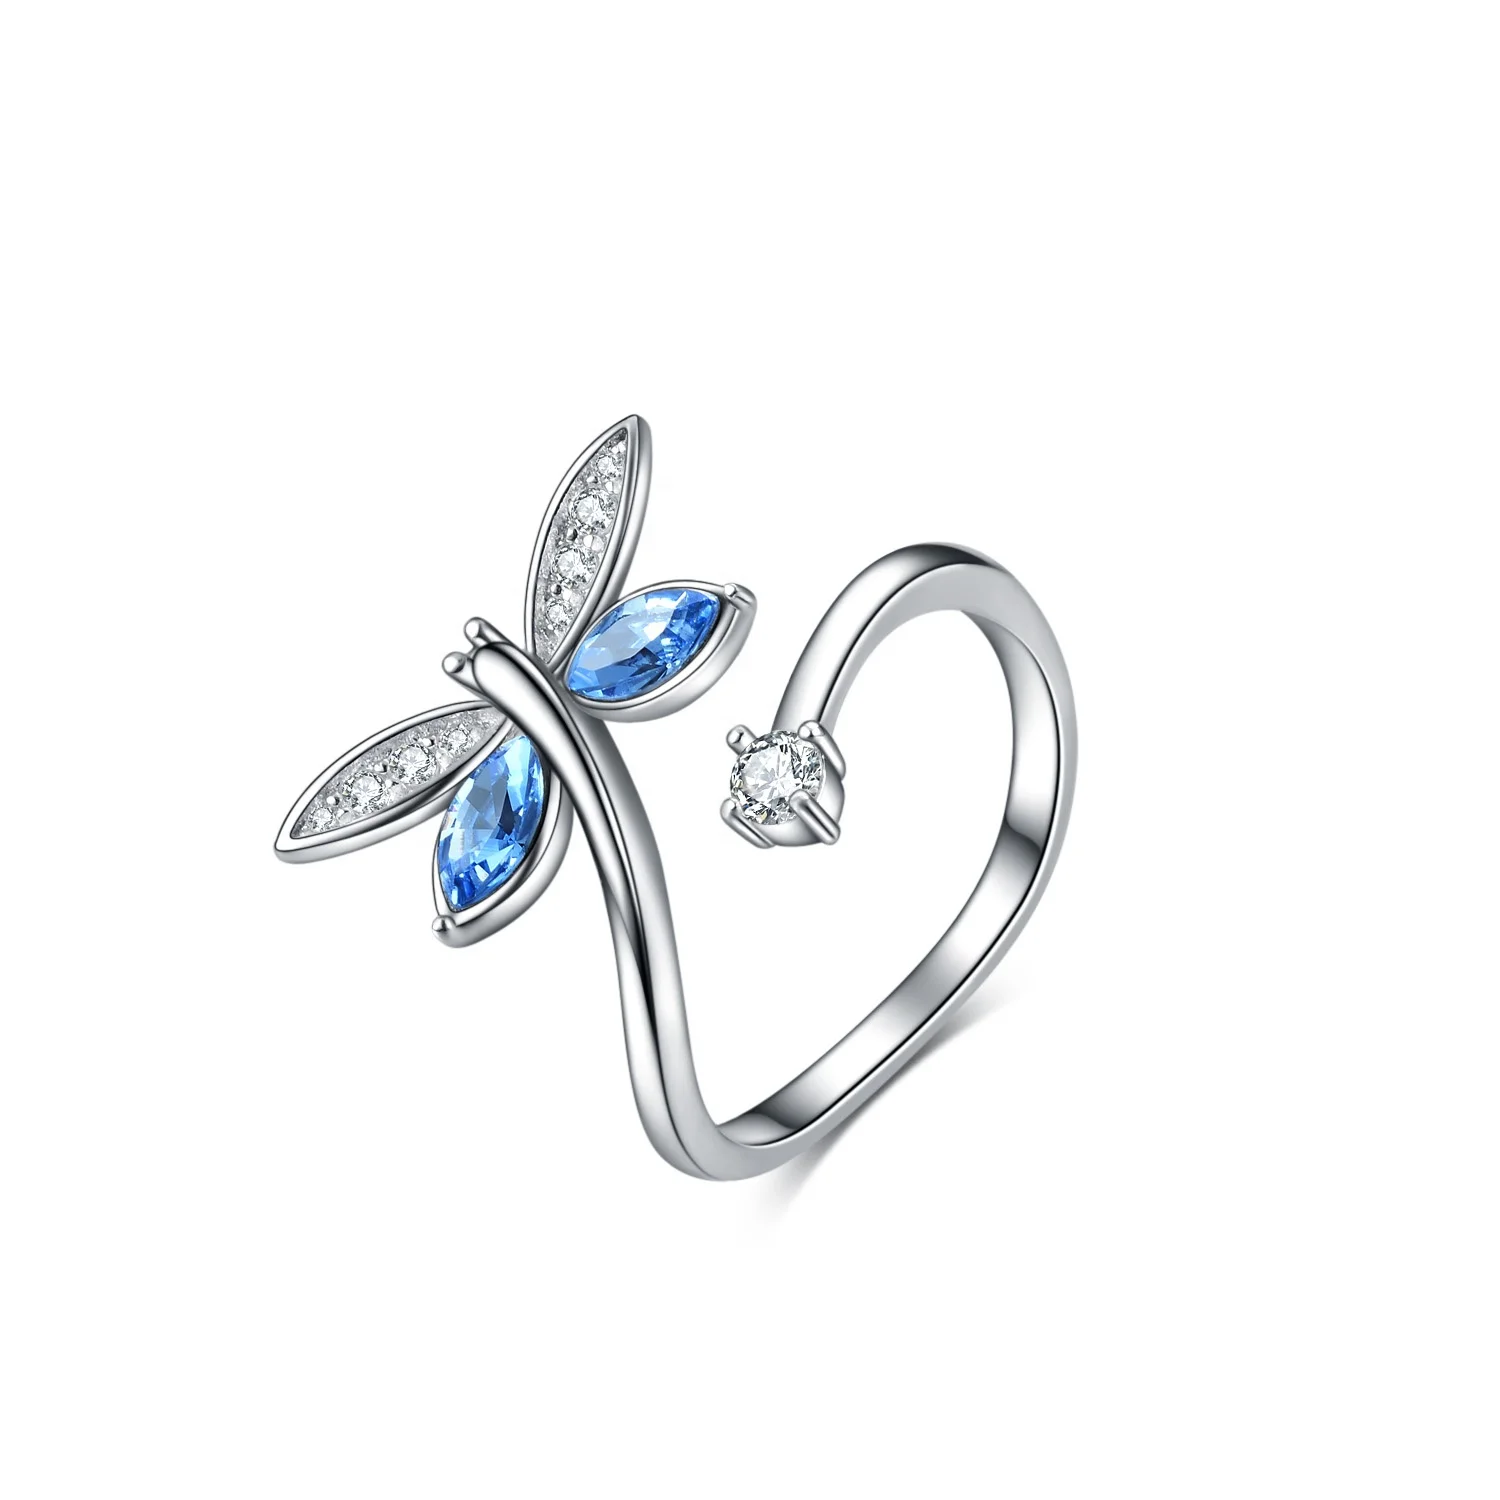 Fashion Women 925 Silver Ring Butterfly Dragonfly Jewelry Party Girls Gift 